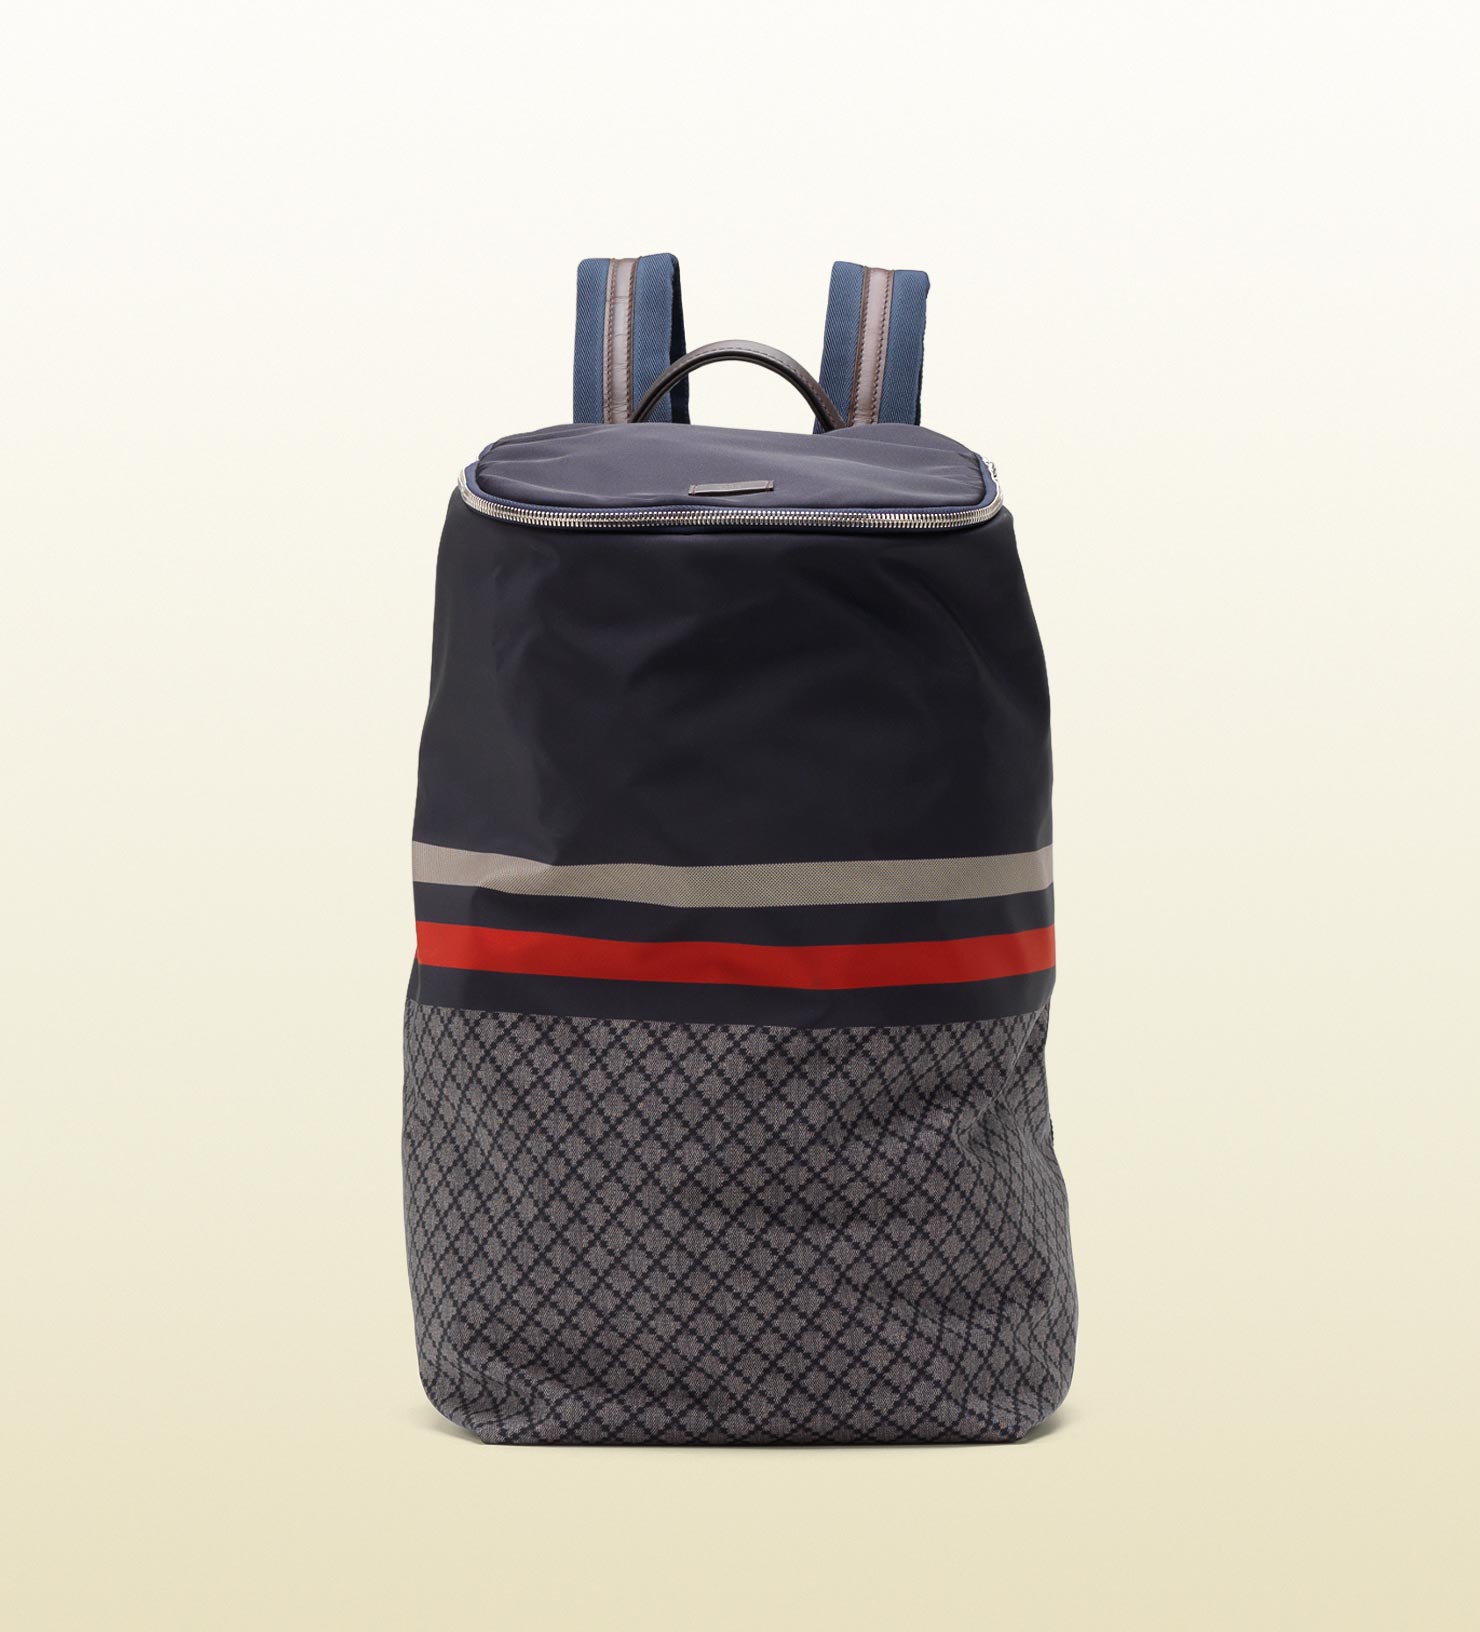 Lyst - Gucci Large Backpack in Blue for Men